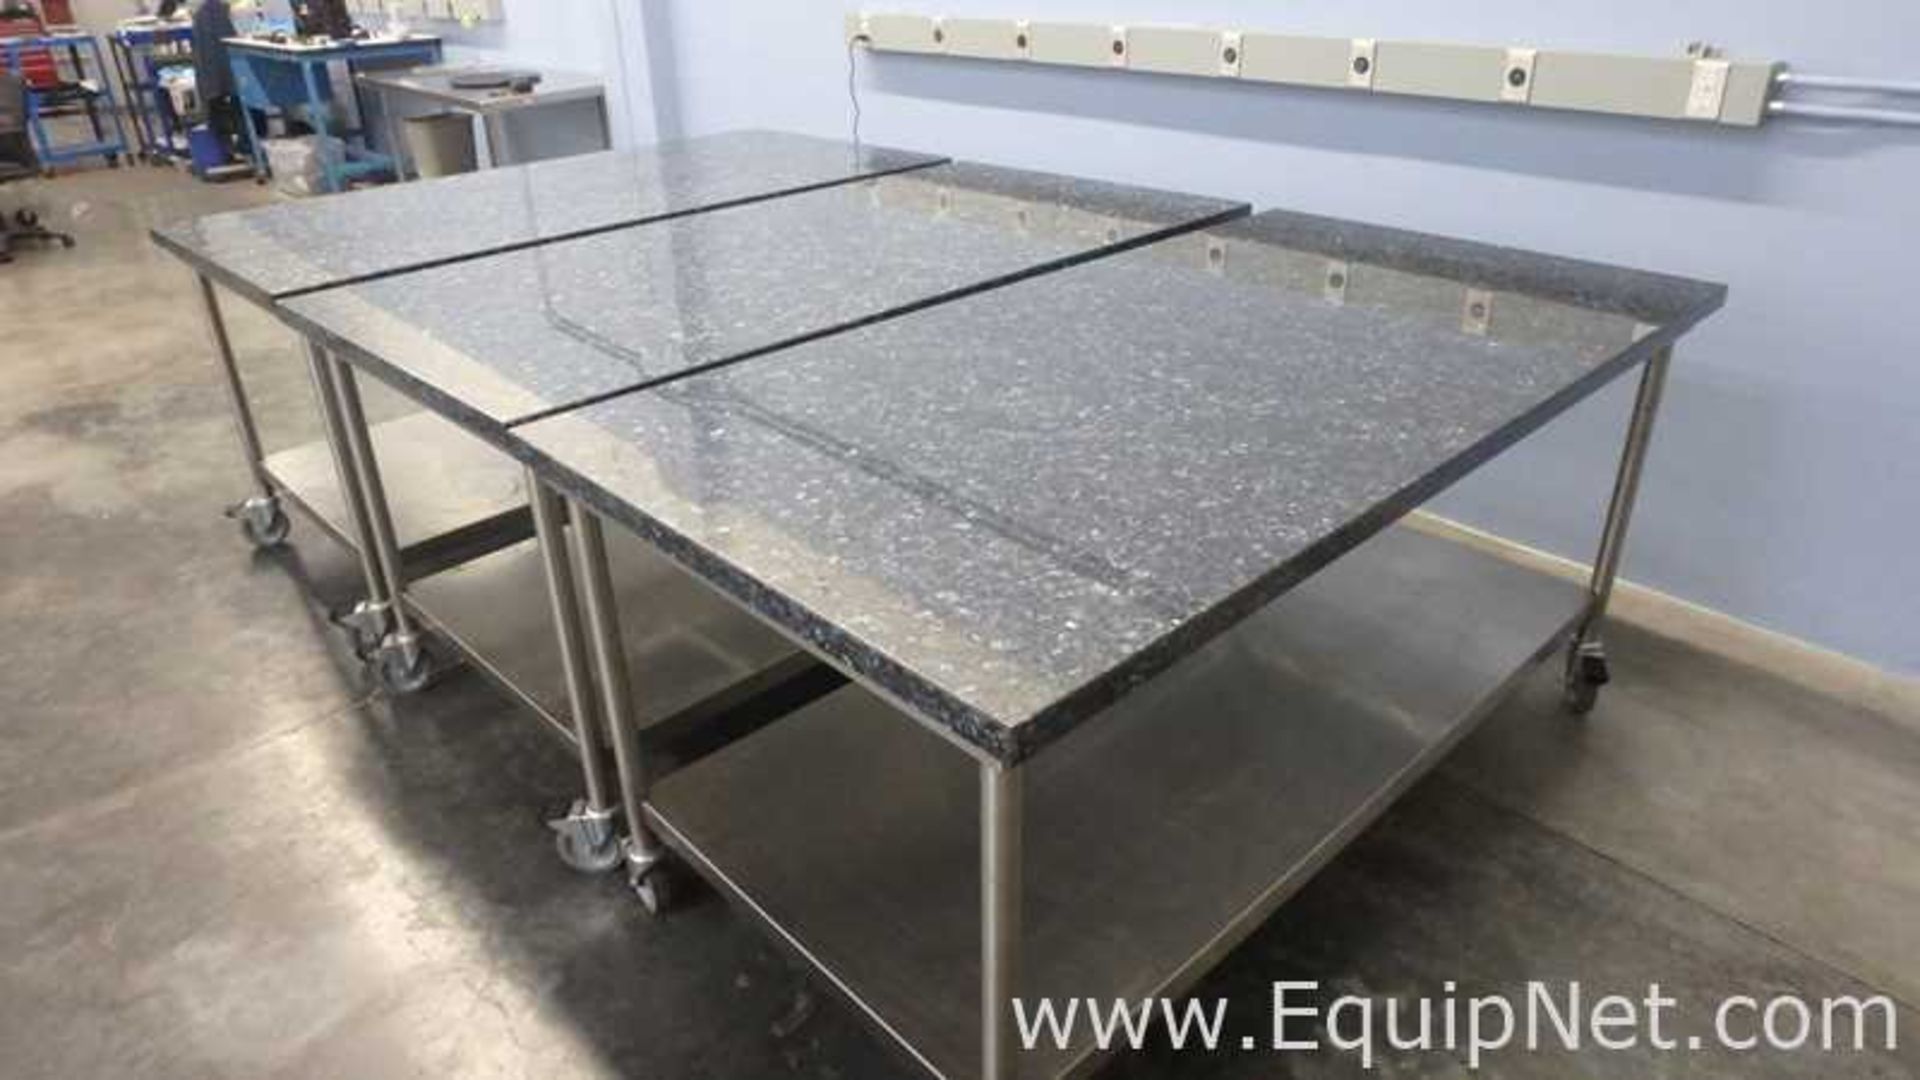 Lot of 3 Granite Top Stainless Steel Work Tables 75in x 39in - Image 6 of 9